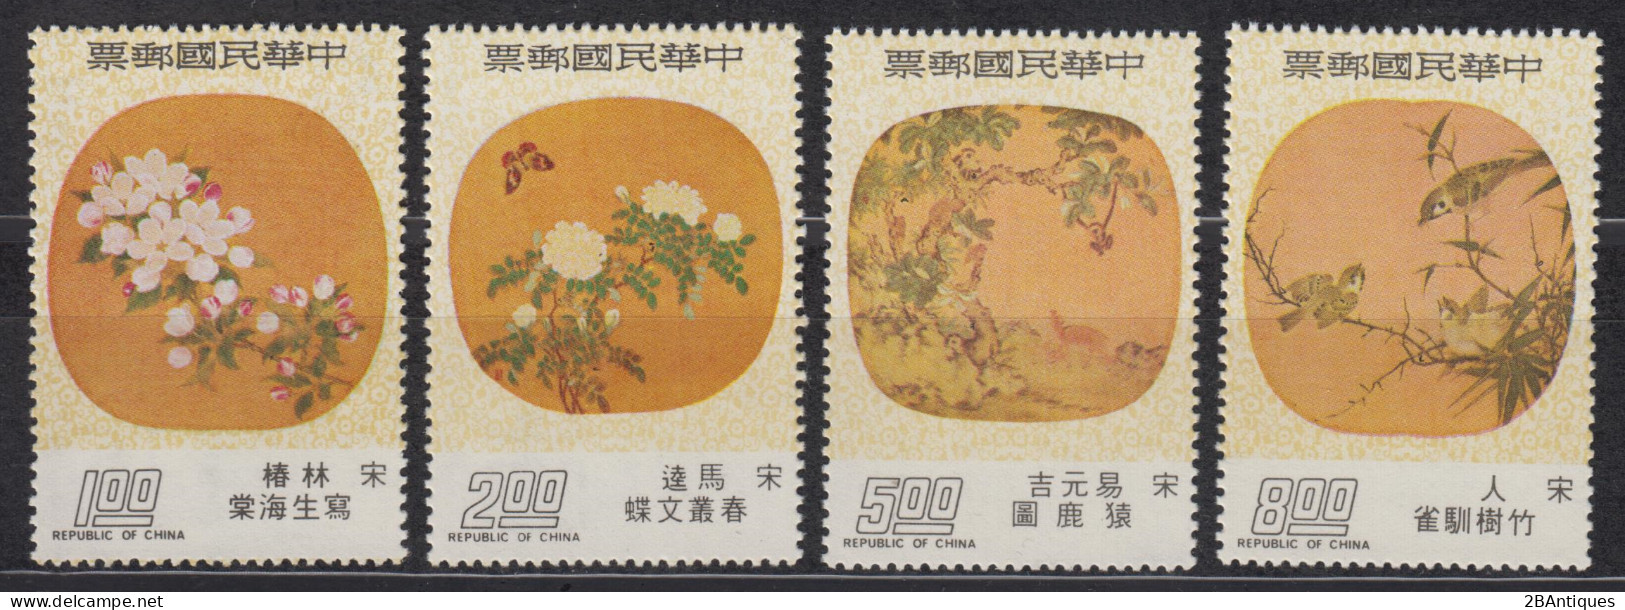 TAIWAN 1975 - Ancient Chinese Moon-shaped Fan Paintings MNH** OG XF - Neufs